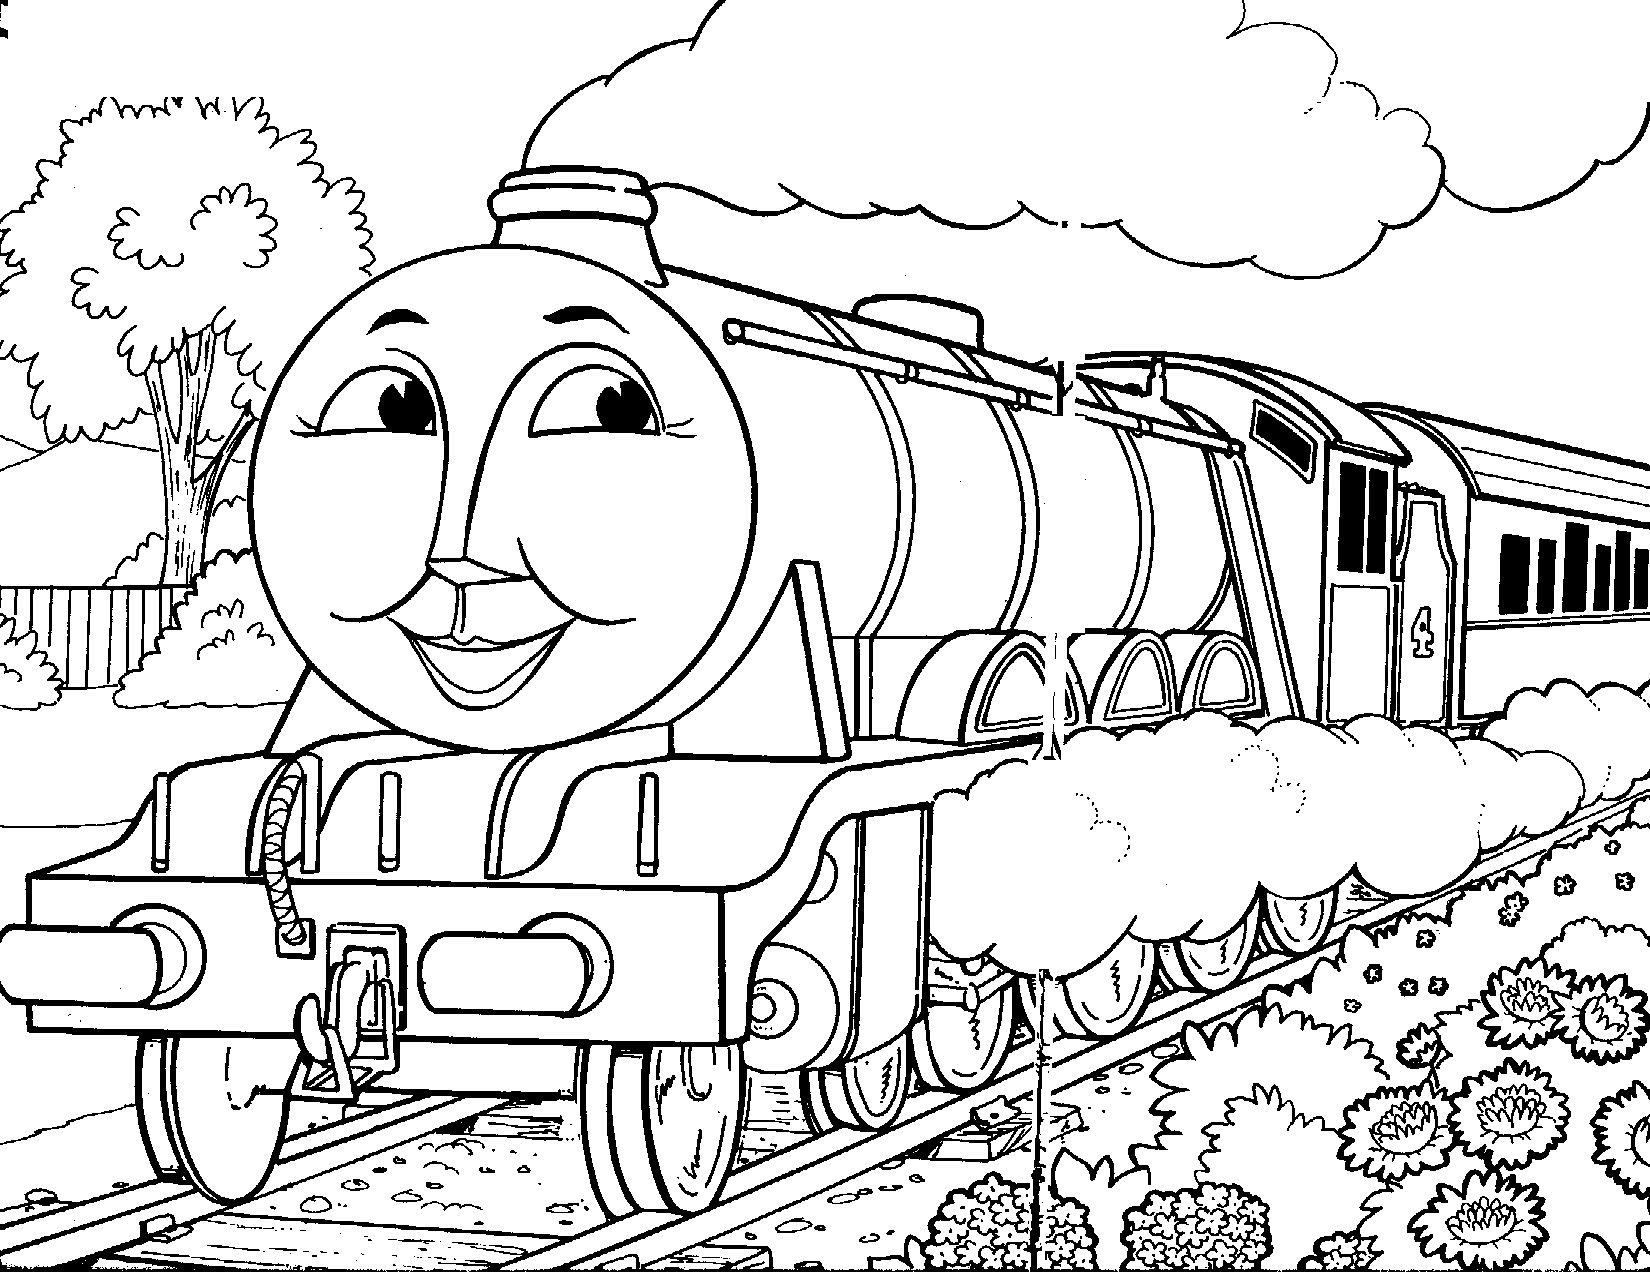 thomas and friends coloring pages thomas and friends coloring pages getcoloringpagescom pages coloring thomas and friends 